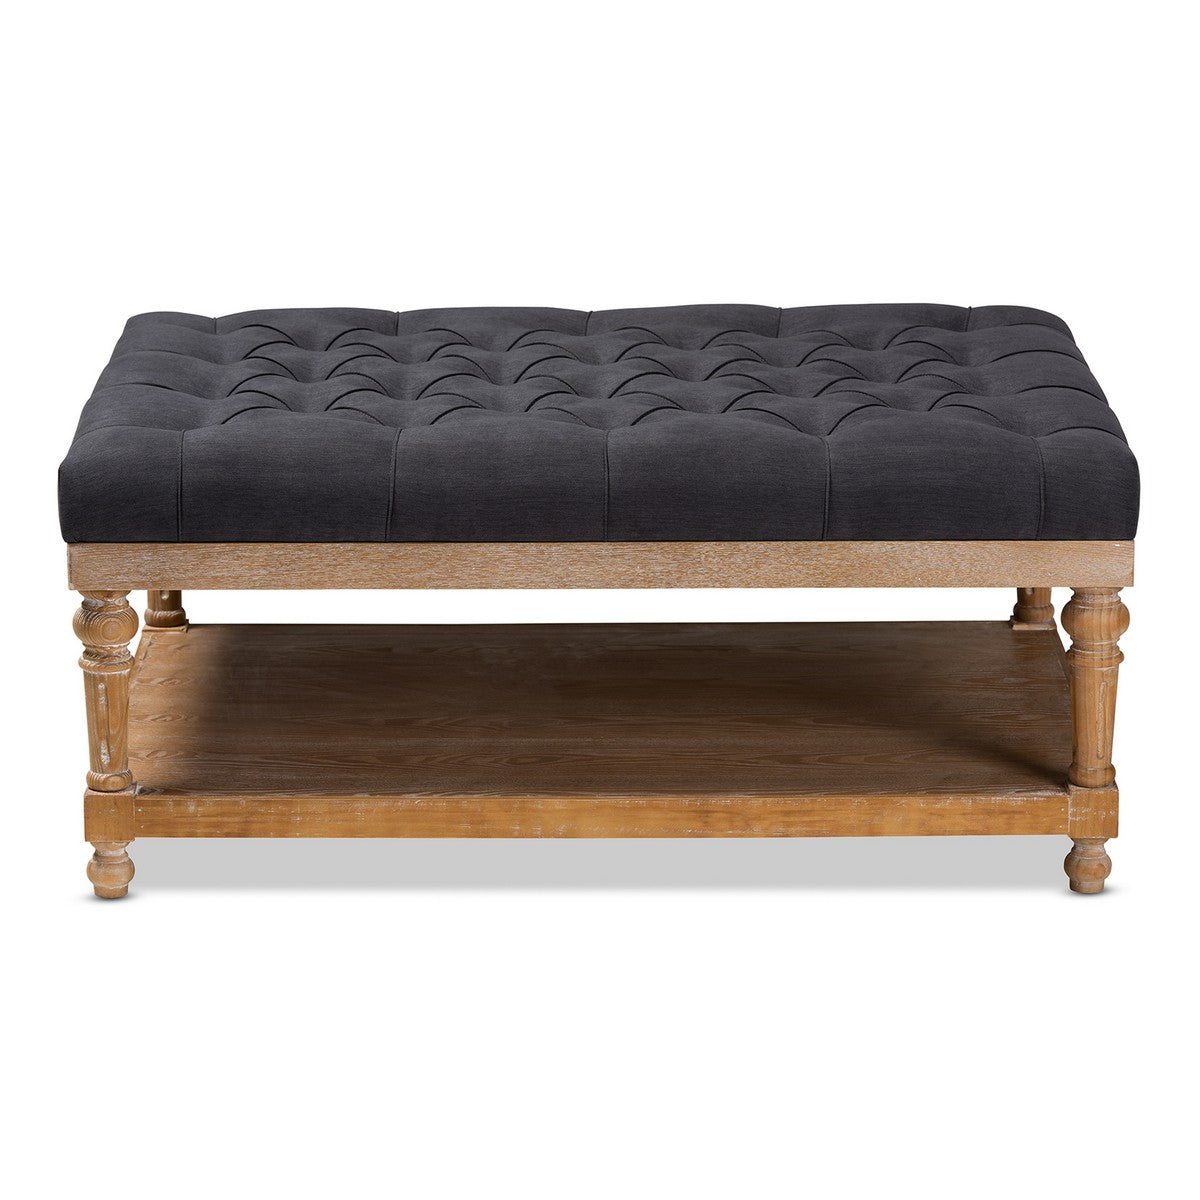 Baxton Studio Lindsey Modern and Rustic Charcoal Linen Fabric Upholstered and Greywashed Wood Cocktail Ottoman